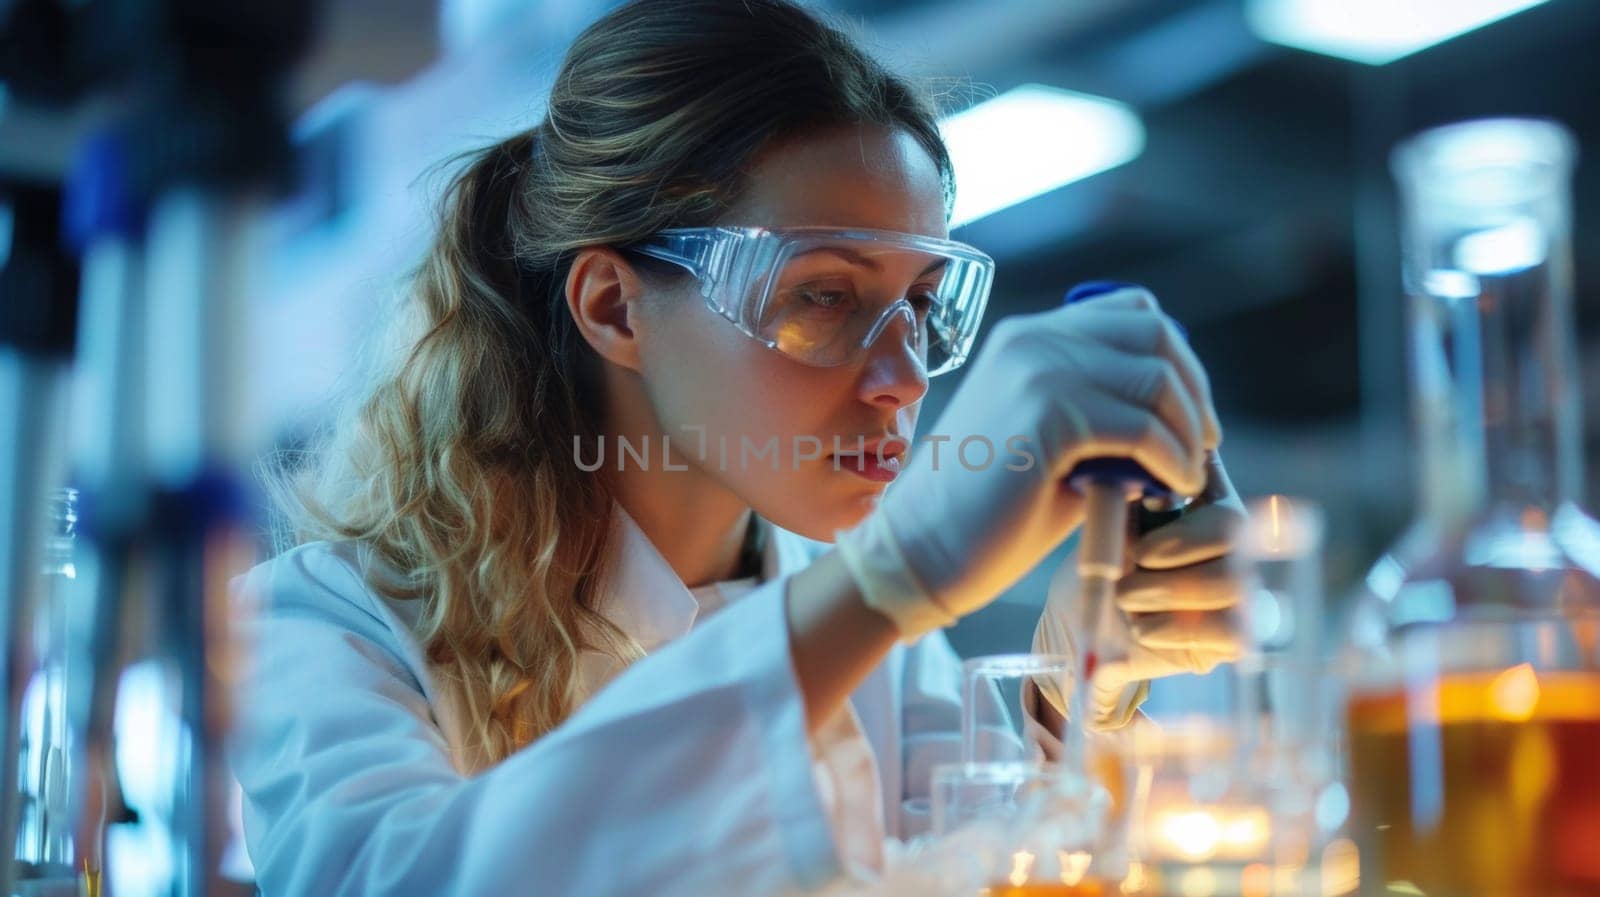 A woman in lab coat working on a chemical reaction